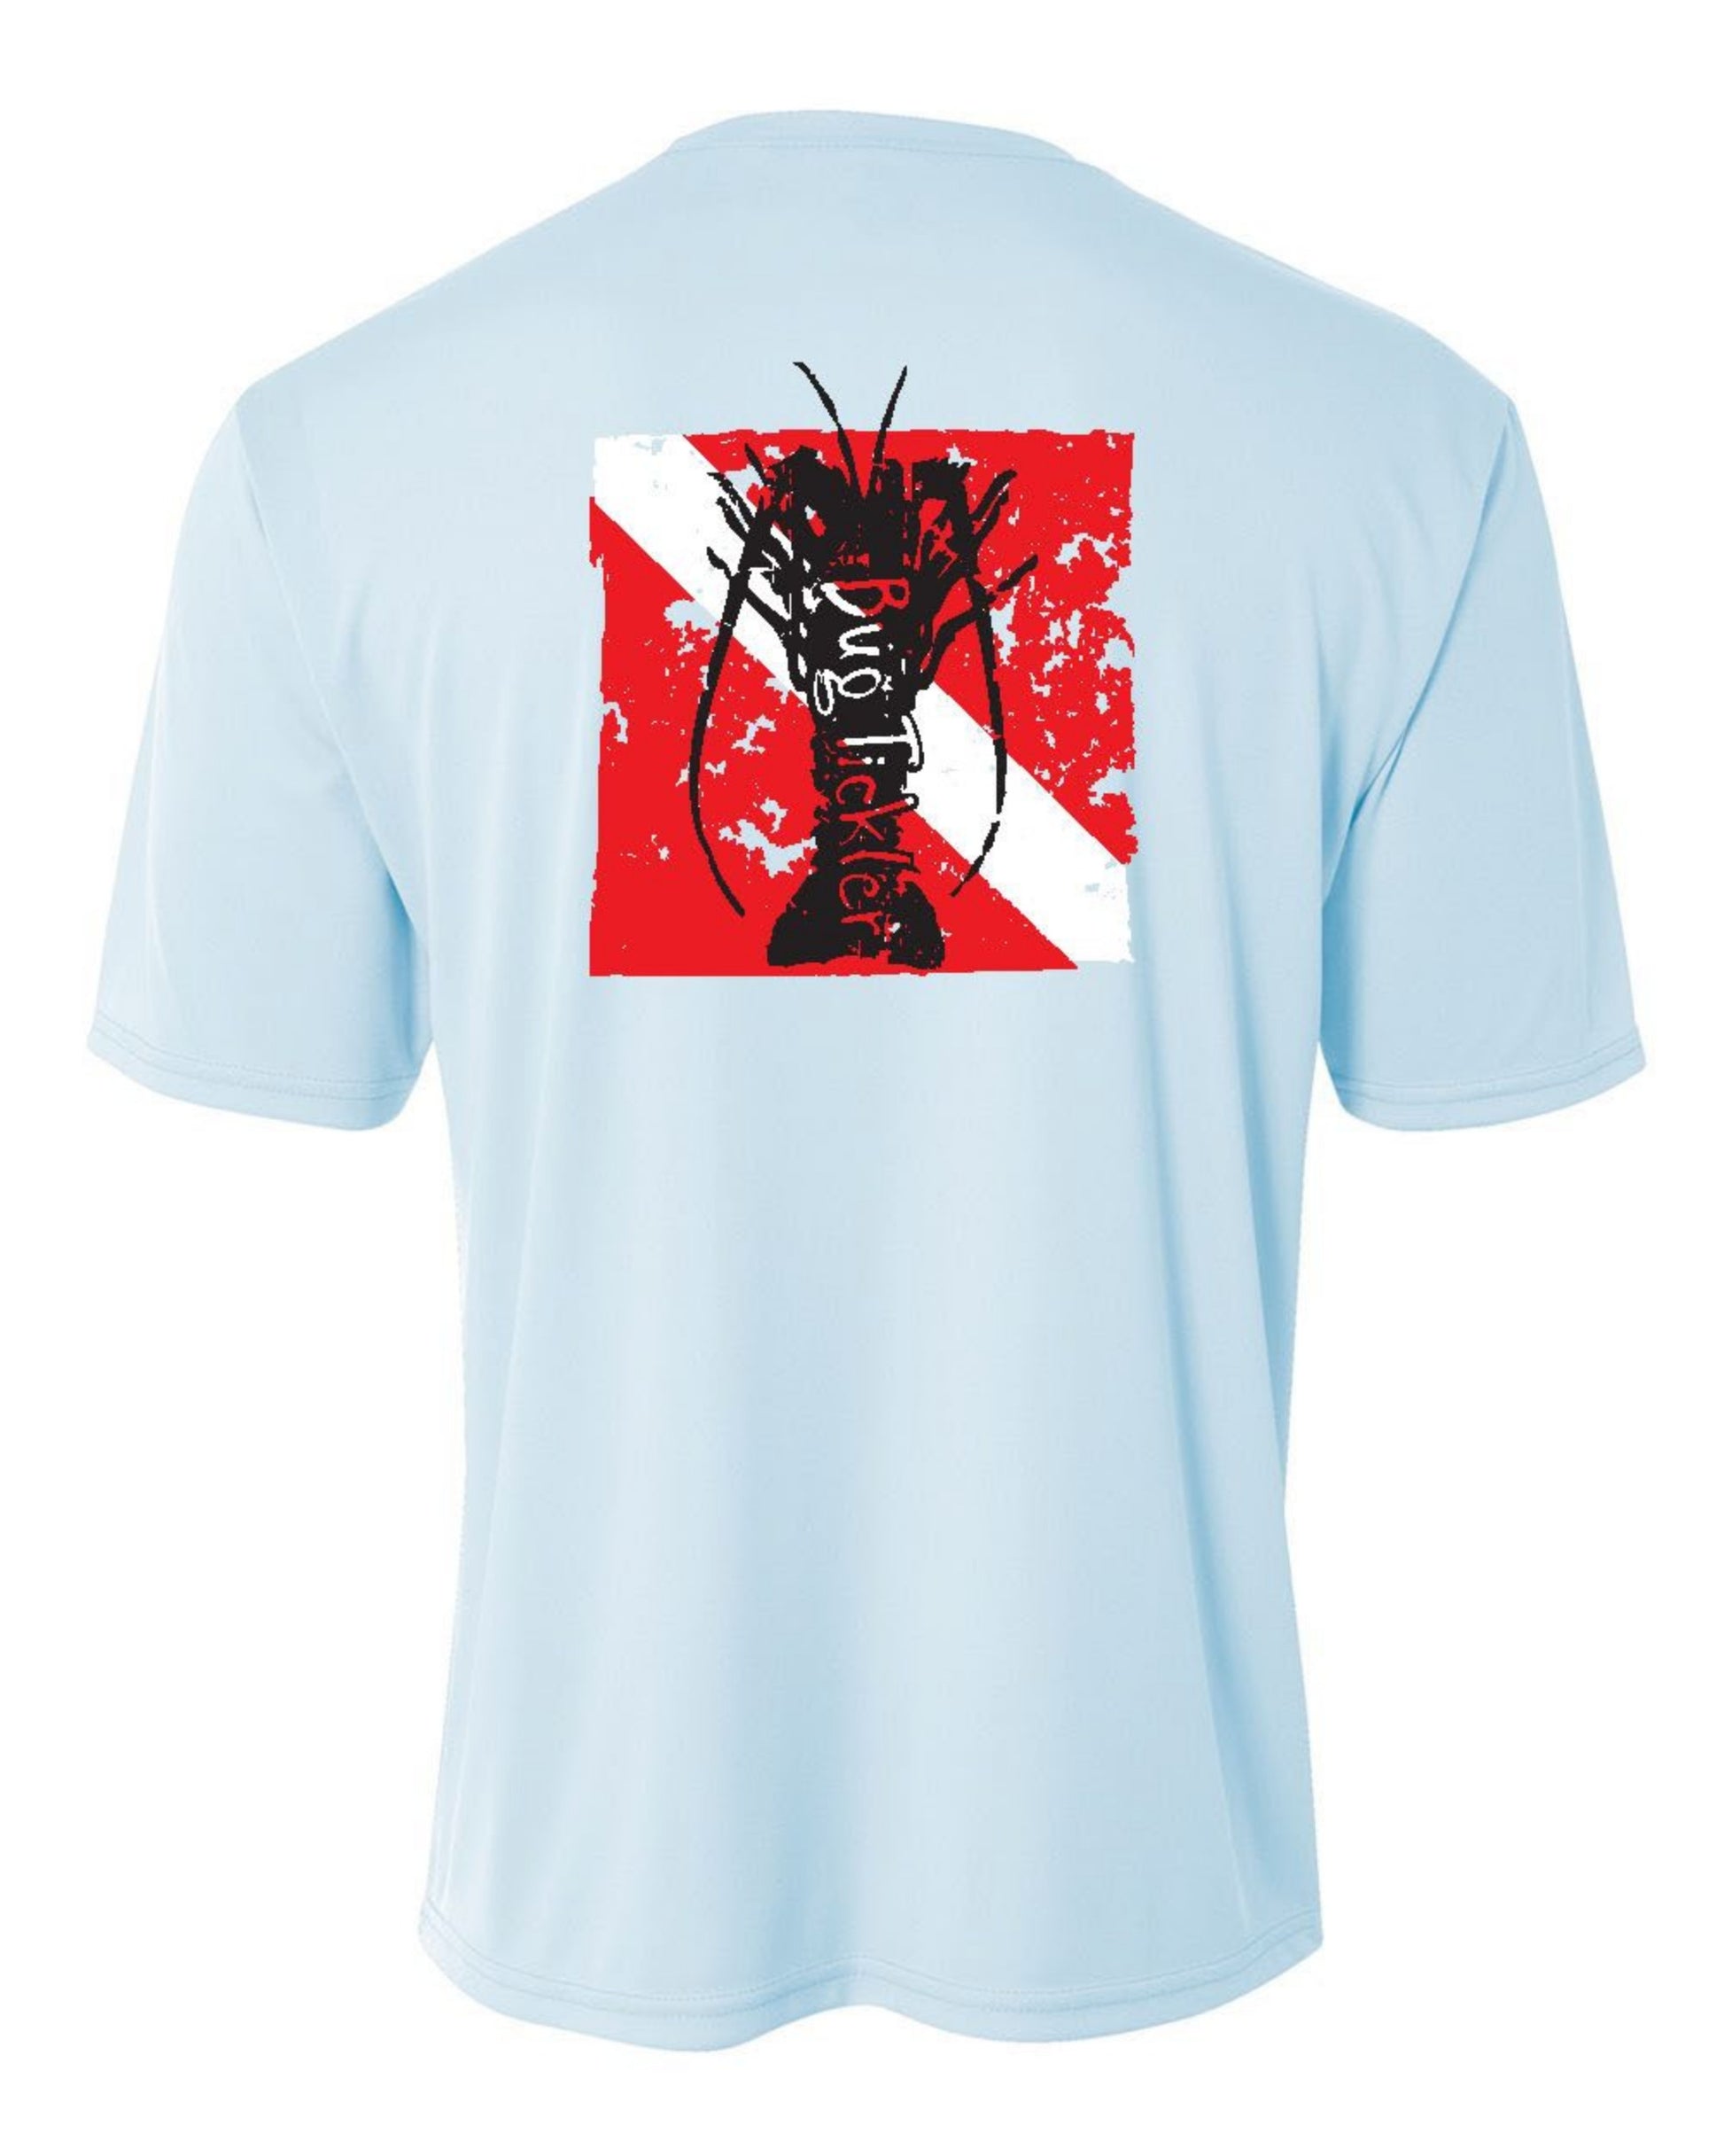 Lt. Blue Youth Lobster "Bug Tickler" Short Sleeve Performance Dry-Fit Shirts with Sun Protection by Reel Fishy Apparel